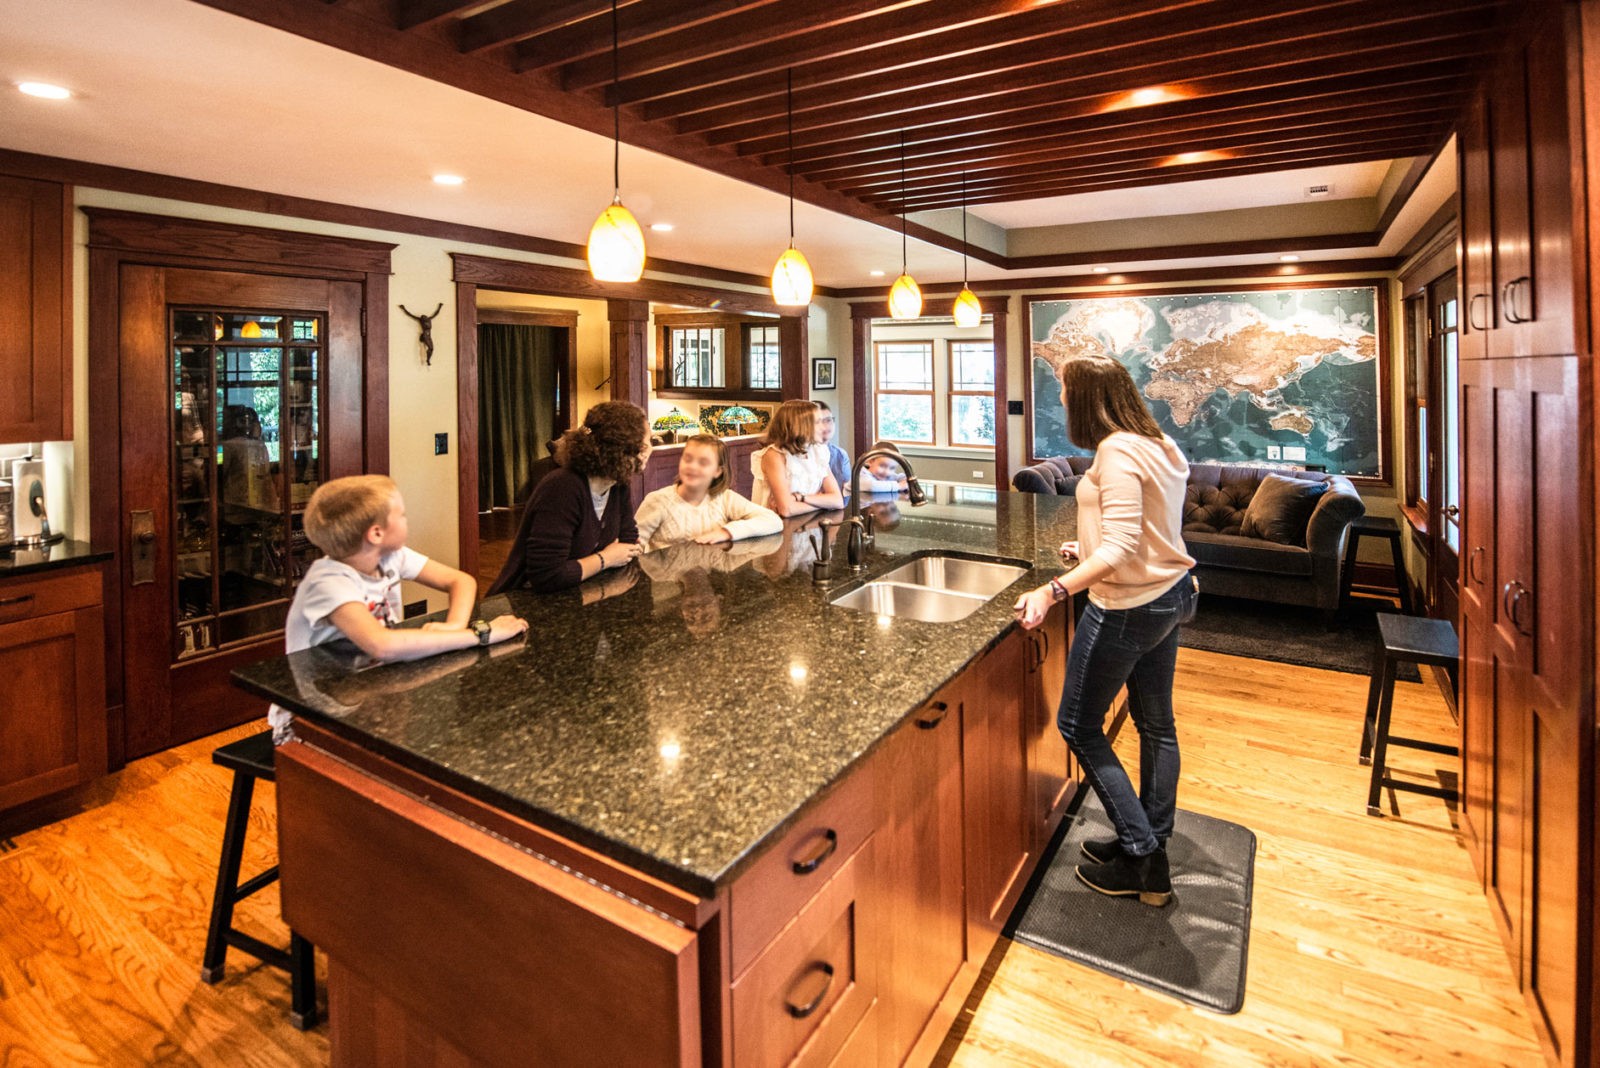 Family in a kitchen with large bar, brown wood cabinets & drawers, couch at far end of room